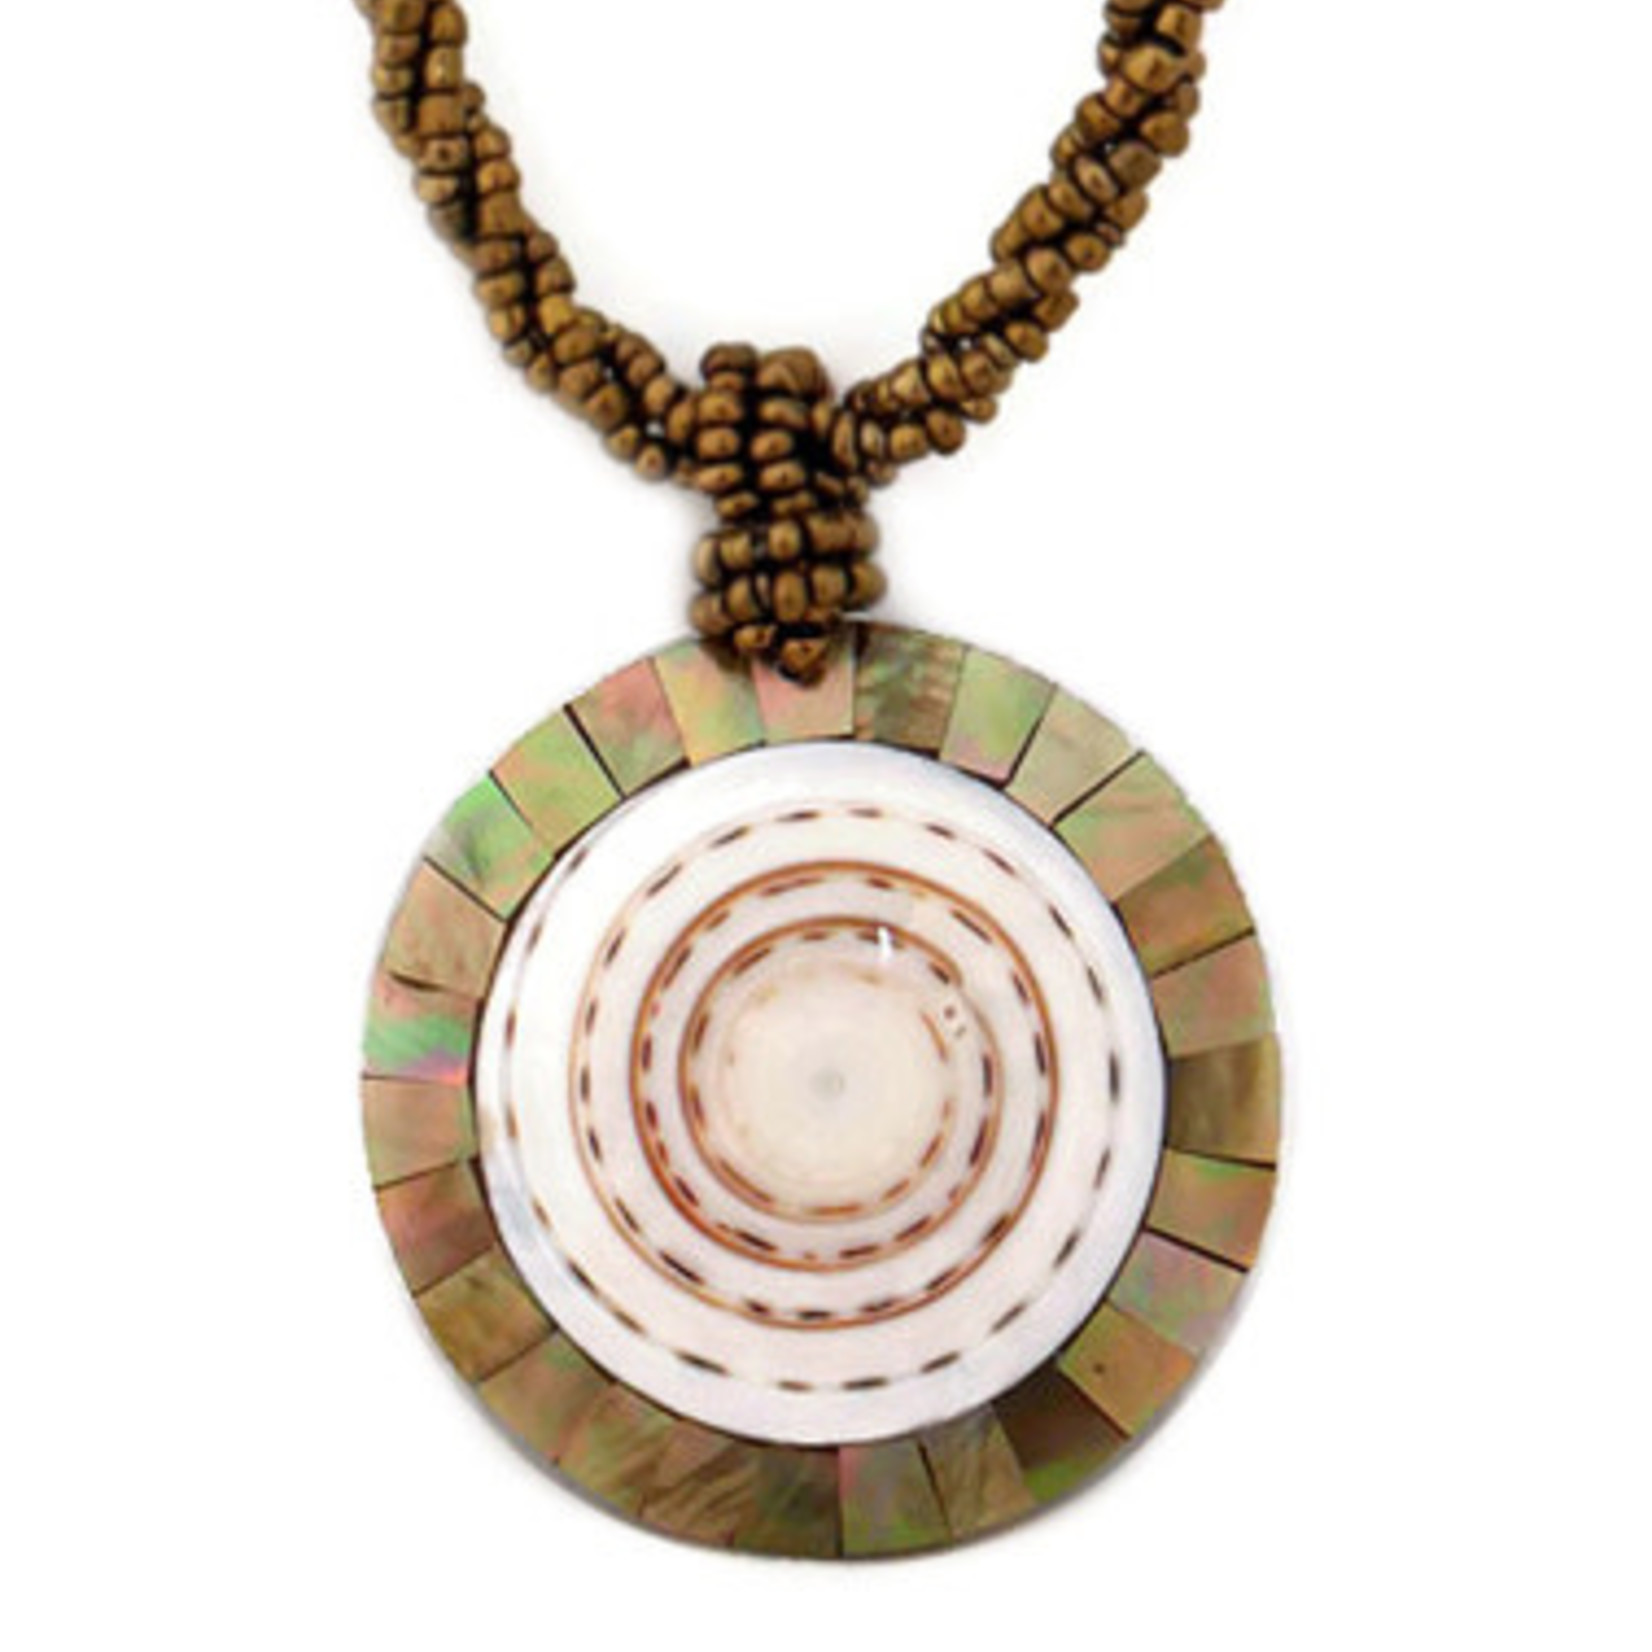 Shell Necklace Spiral Cone with Gold Mosaic Trim with Gold Beads - N110